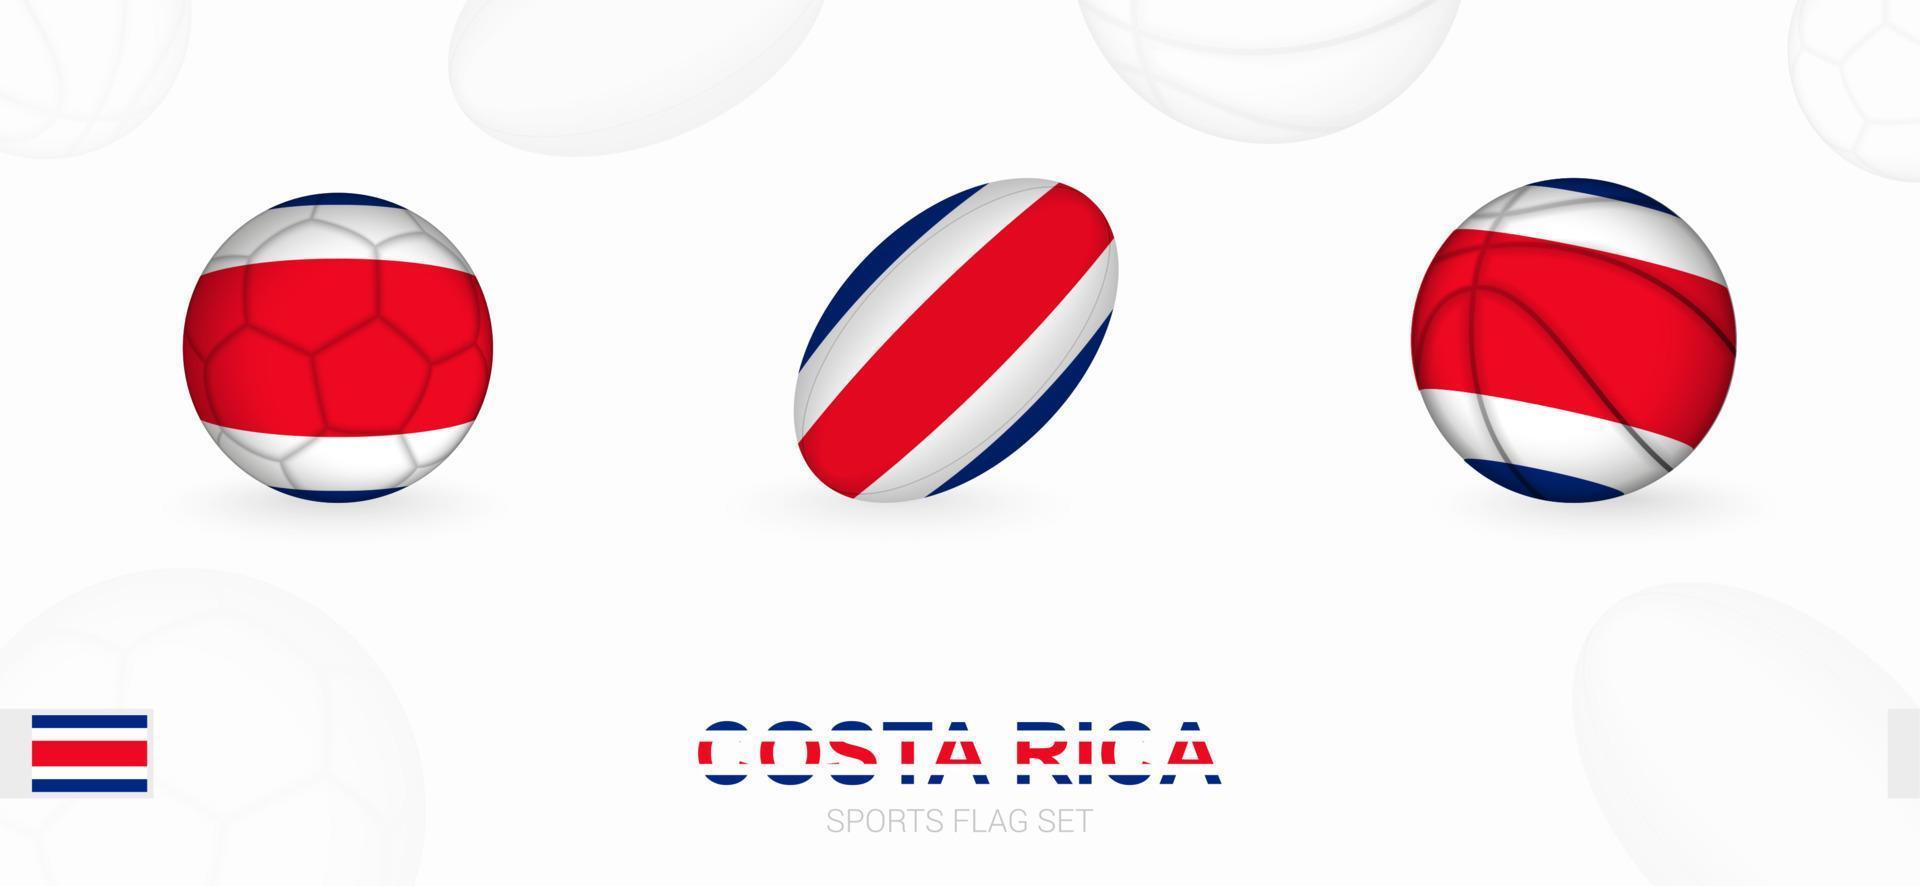 Sports icons for football, rugby and basketball with the flag of Costa Rica. vector